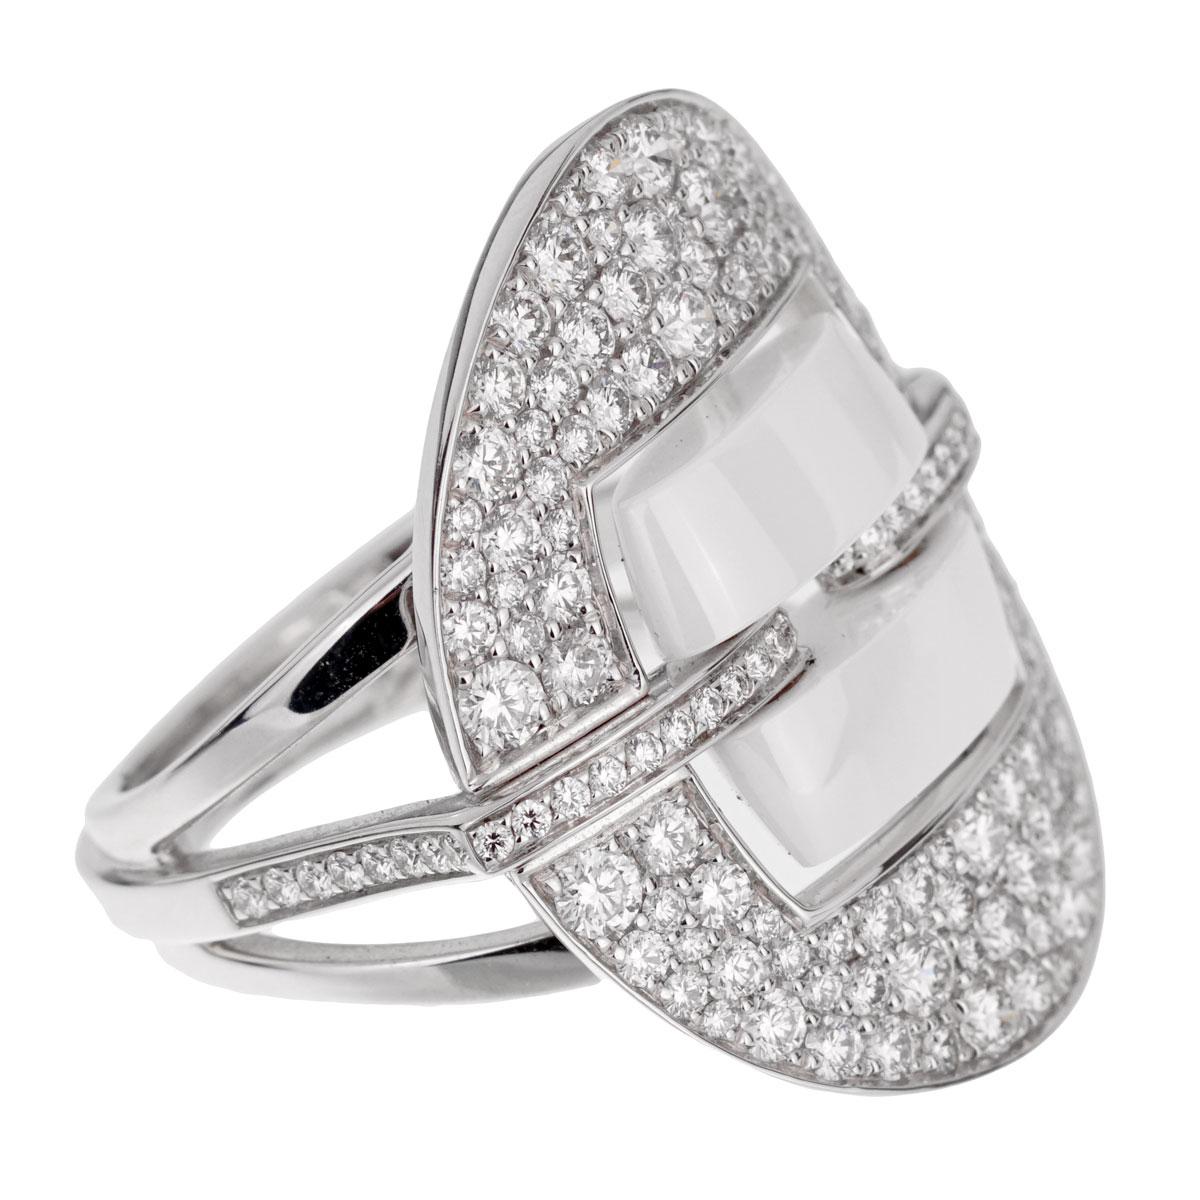 A chic Chanel diamond ring from the Ultra collection showcasing a plethora of round brilliant cut diamonds set in shimmering 18k white gold. The center is set with Chanel's High Tech Ceramic.

Size 5 Resizeable